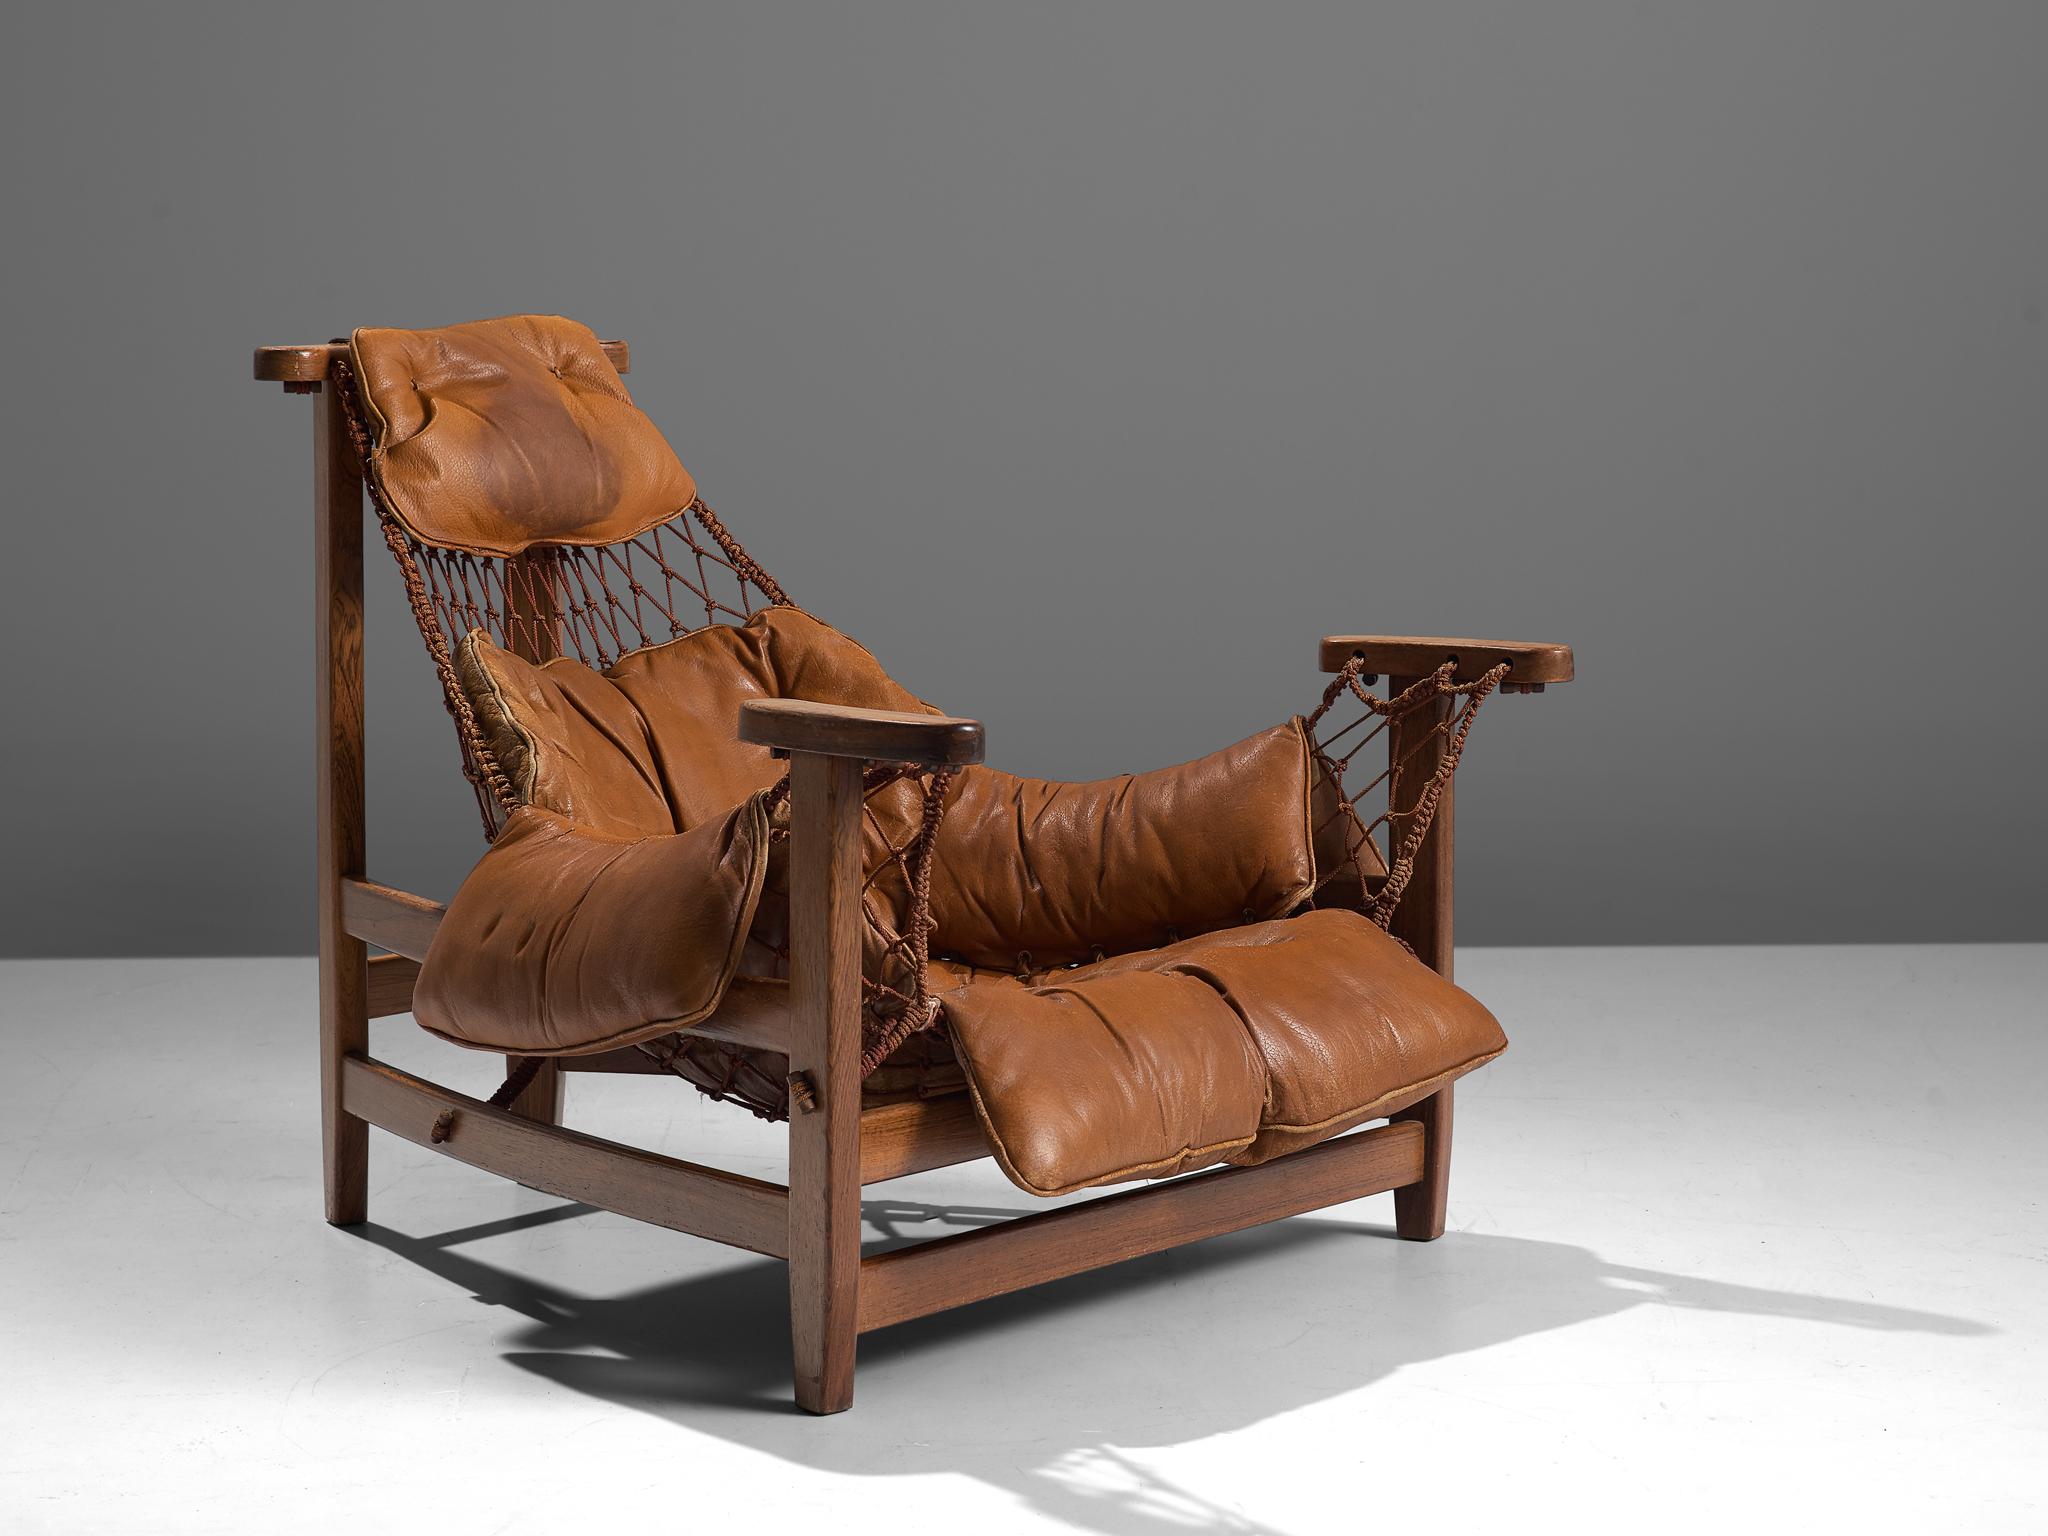 Jean Gillon, 'Jangada' armchair, rosewood, nylon rope, leather, Brazil, 1968.

This robust and hefty armchair is designed by Jean Gillon. The originality of this Jangada comes from the concept of the body being captured by the piece of furniture,